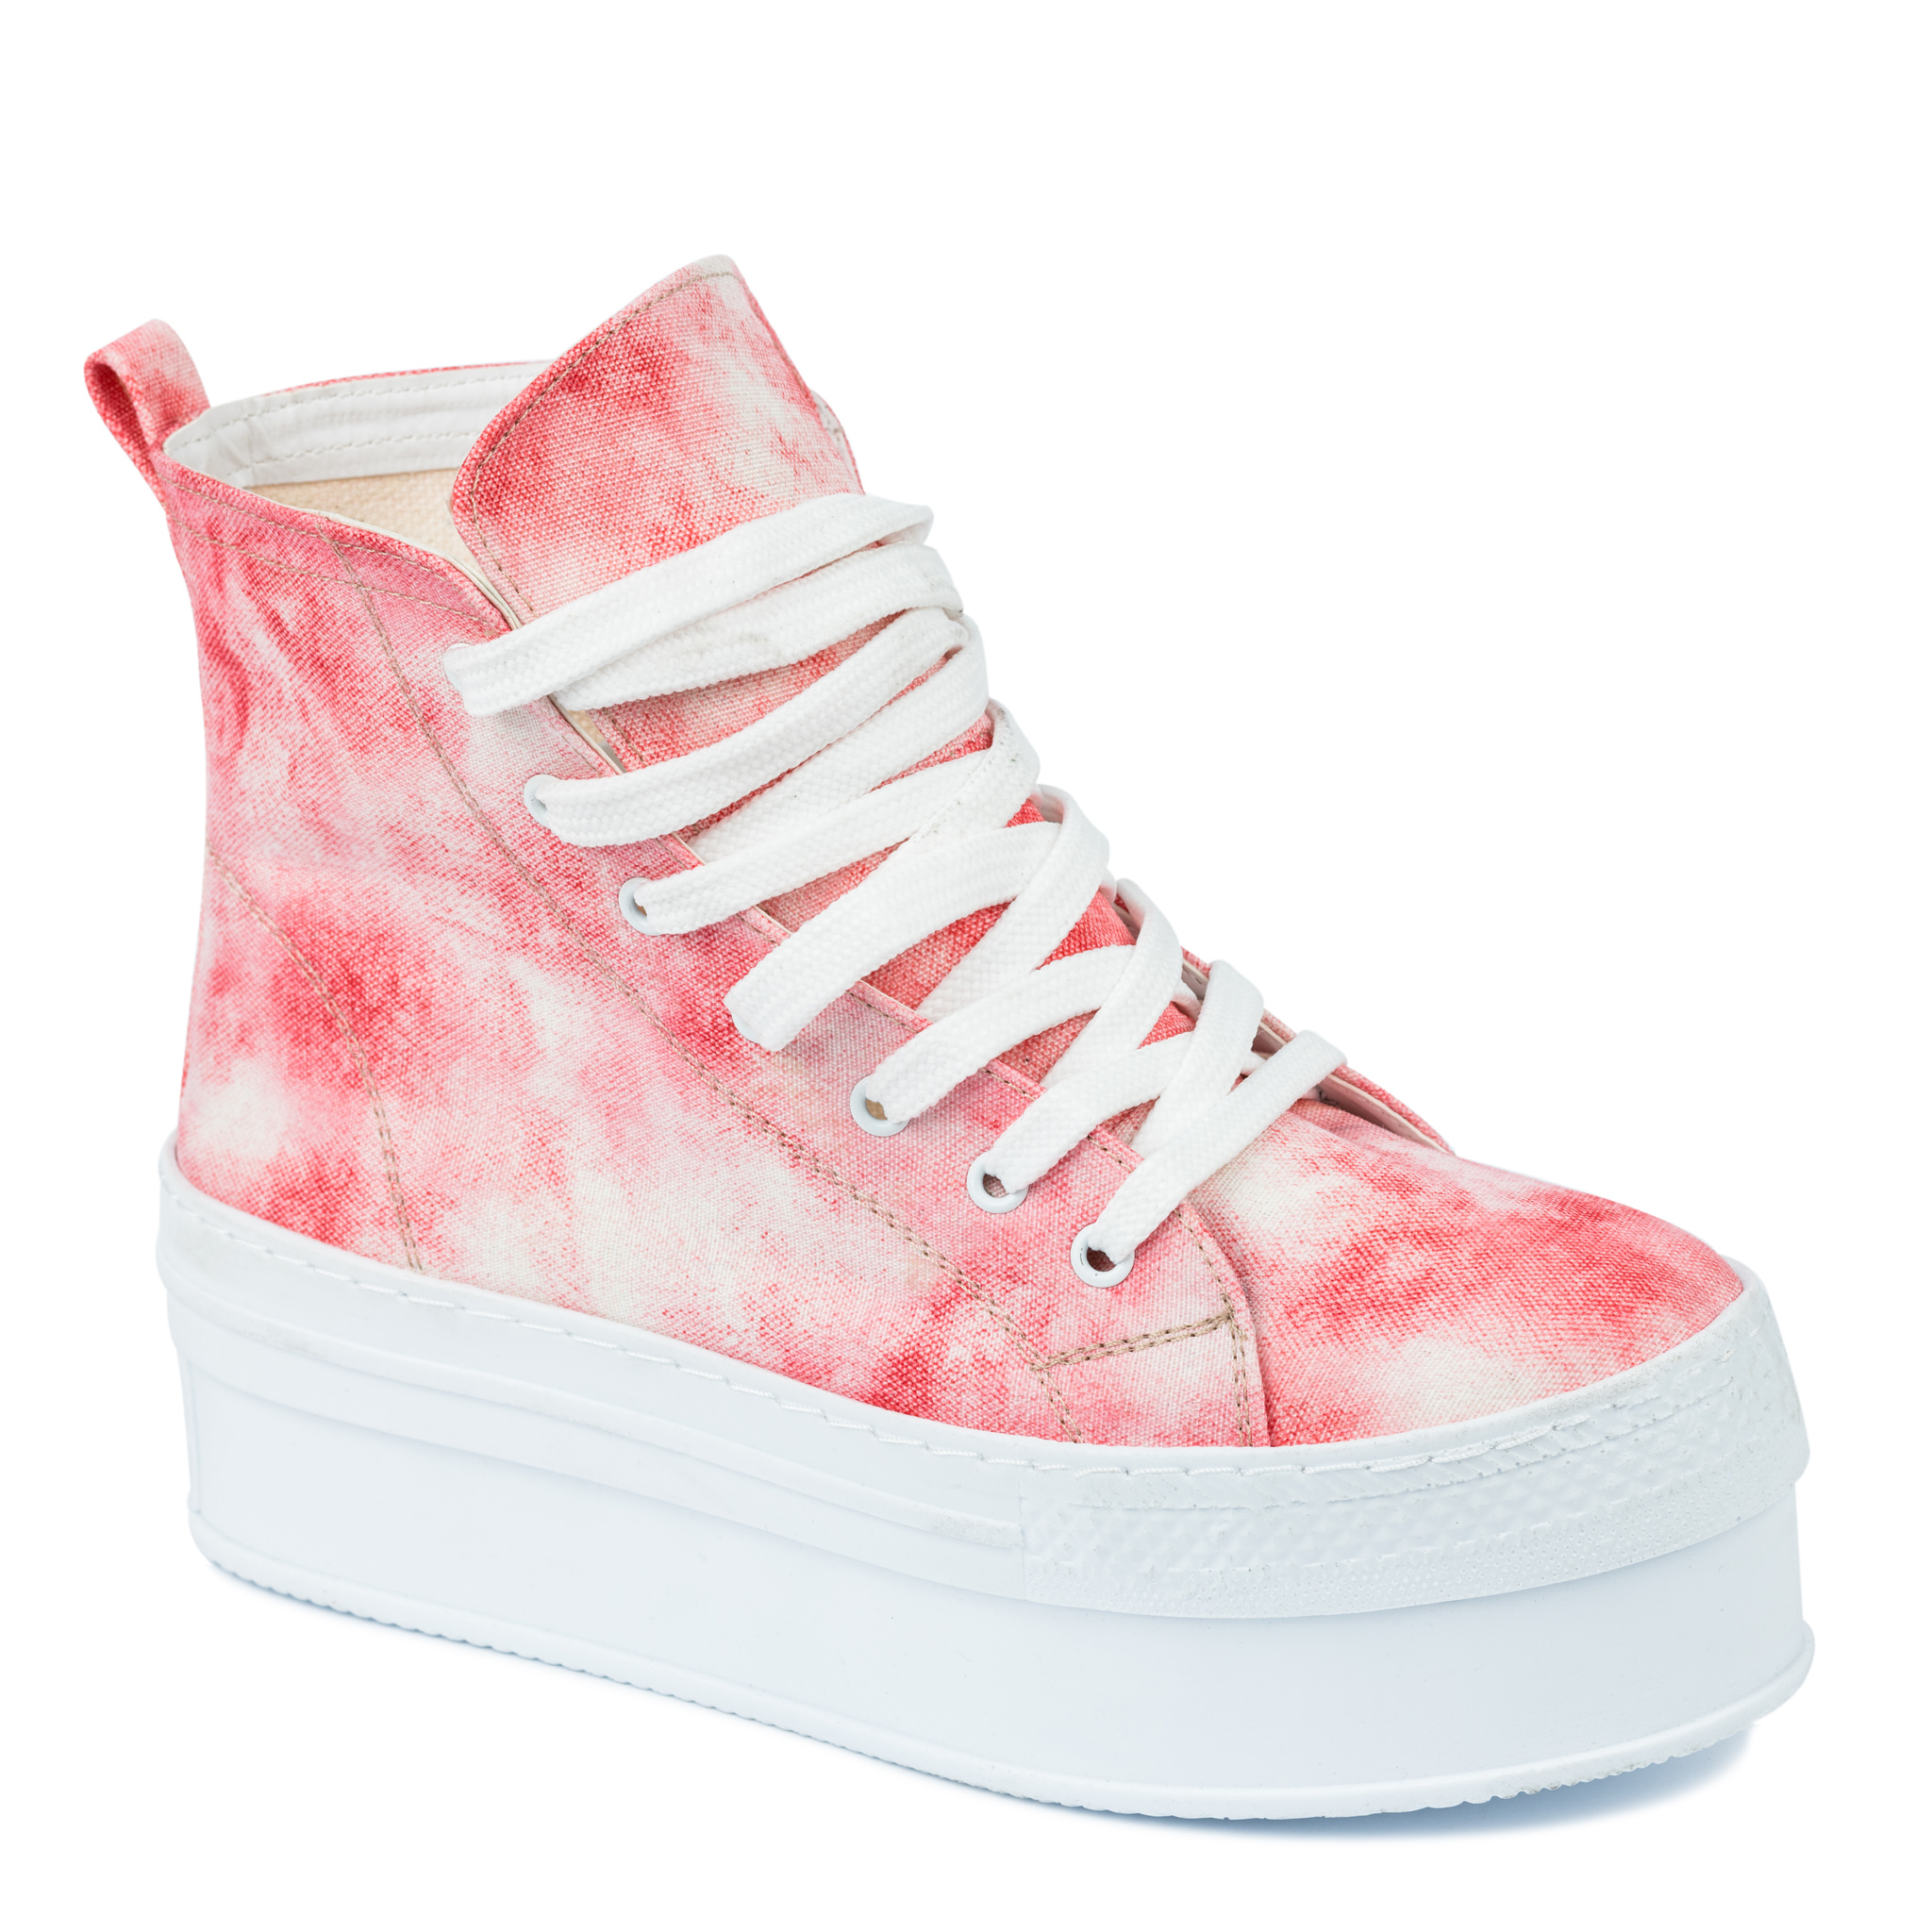 HIGH SOLE ANKLE SNEAKERS - ROSE